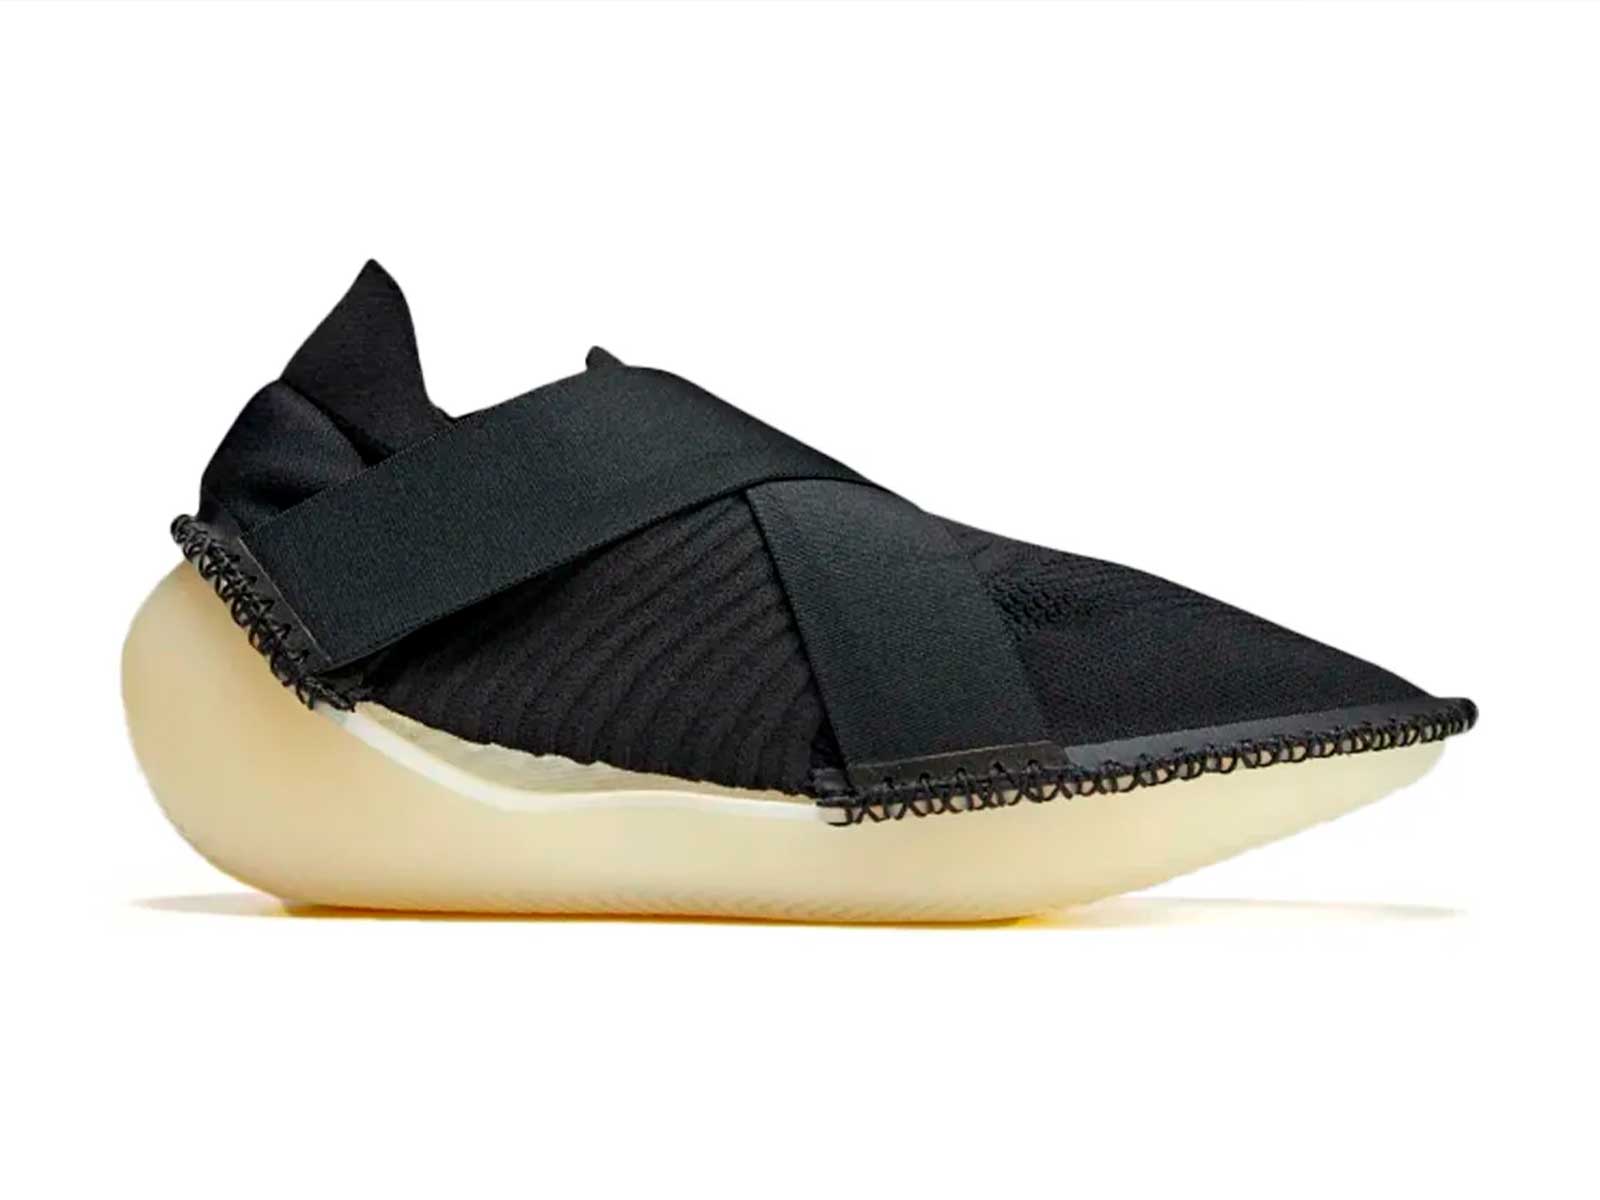 The future of sneakers is the adidas Y-3 IOGO